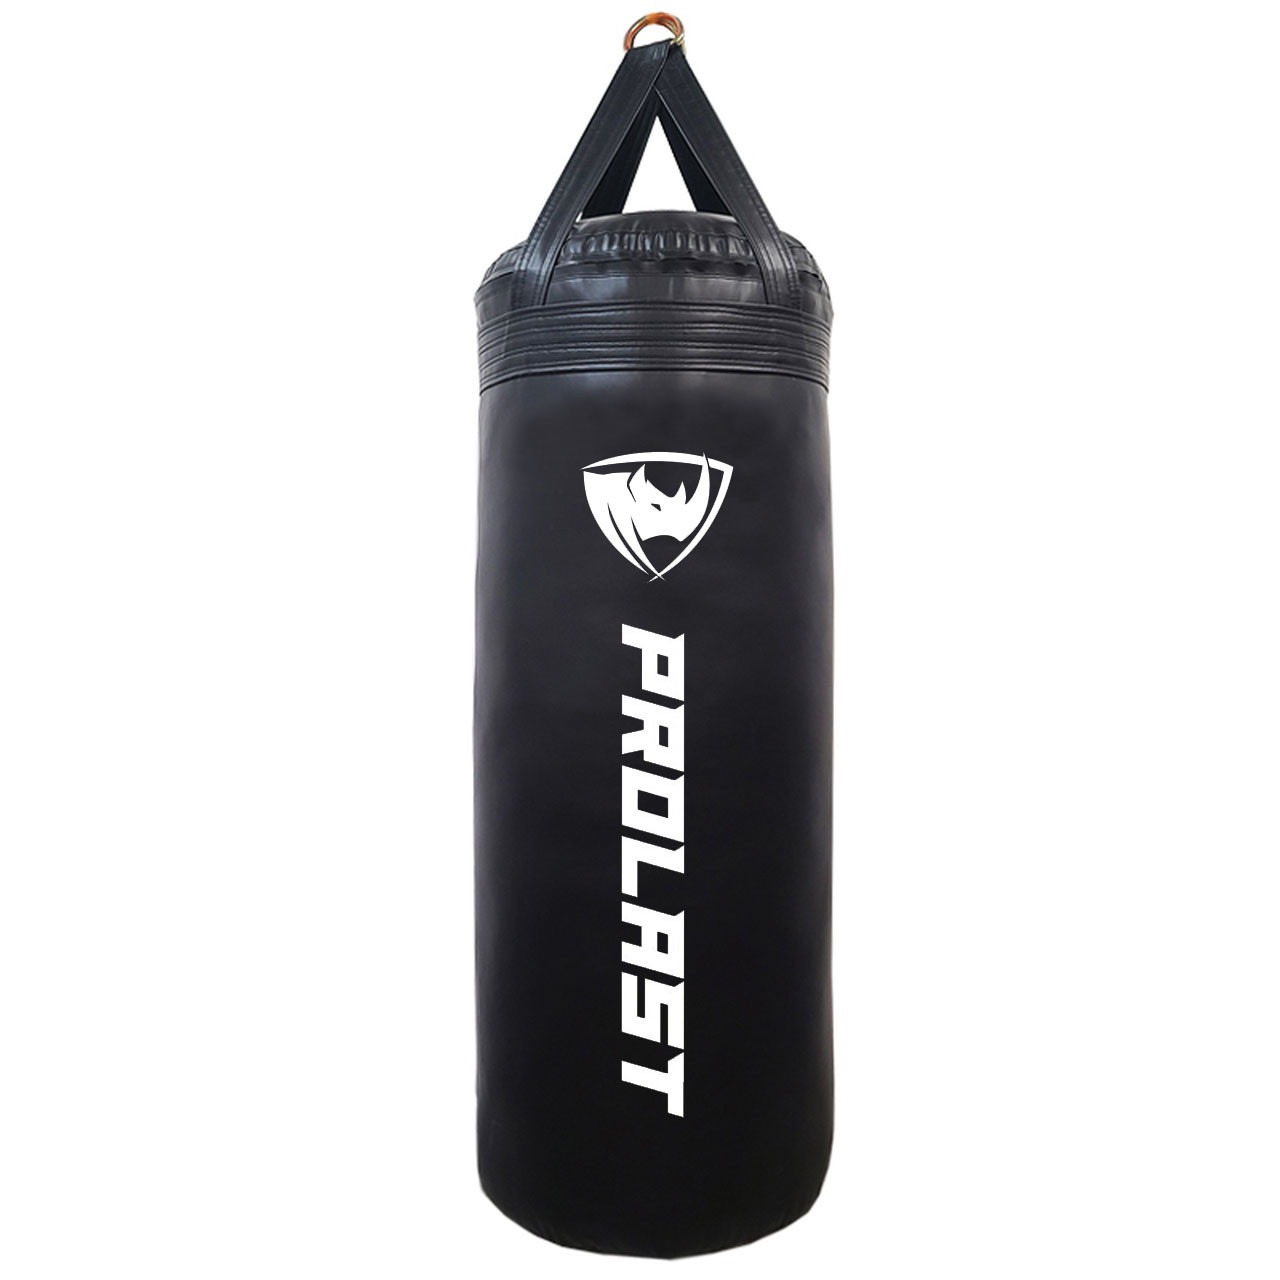 Professional Boxing 150 lbs Wide Heavy Punching Bag MADE IN USA